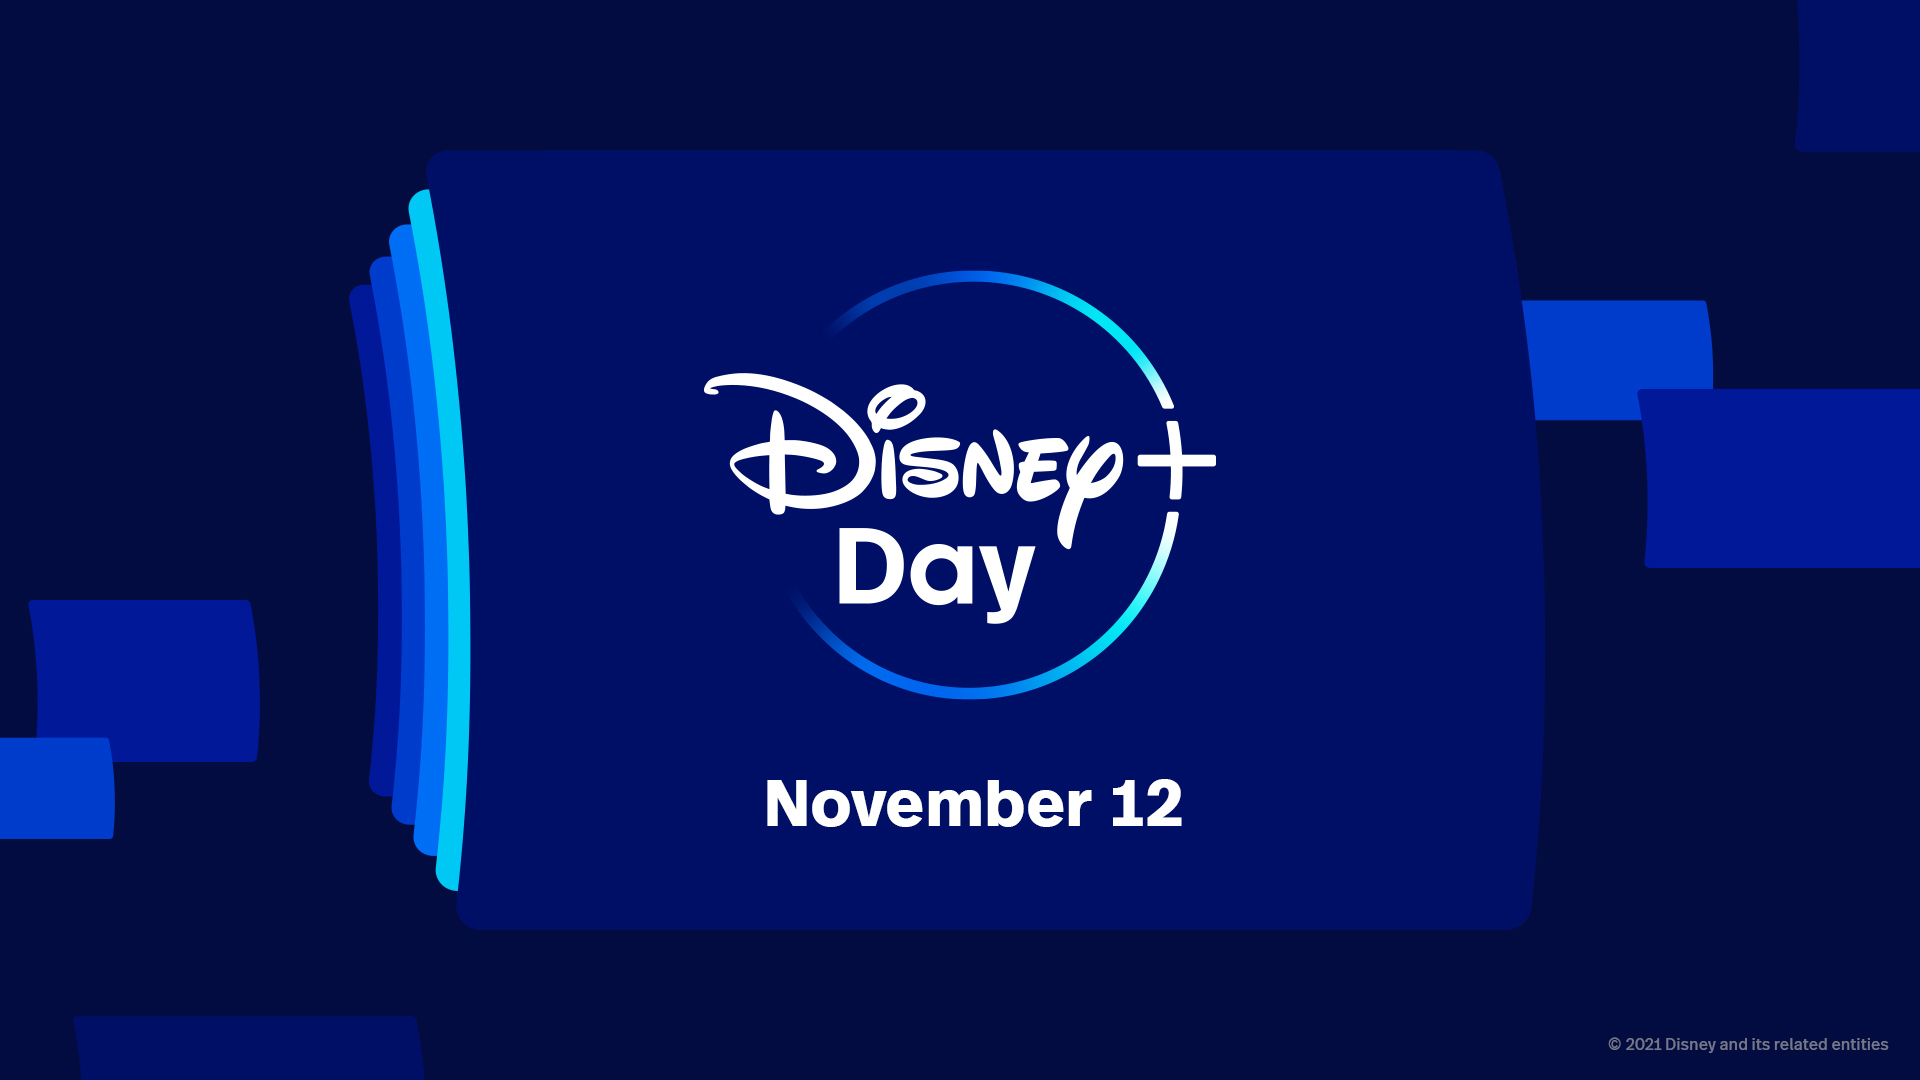 Disney+ Debuts First Looks, Exclusive Footage and New Trailers in  Celebration of Disney+ Day - The Walt Disney Company